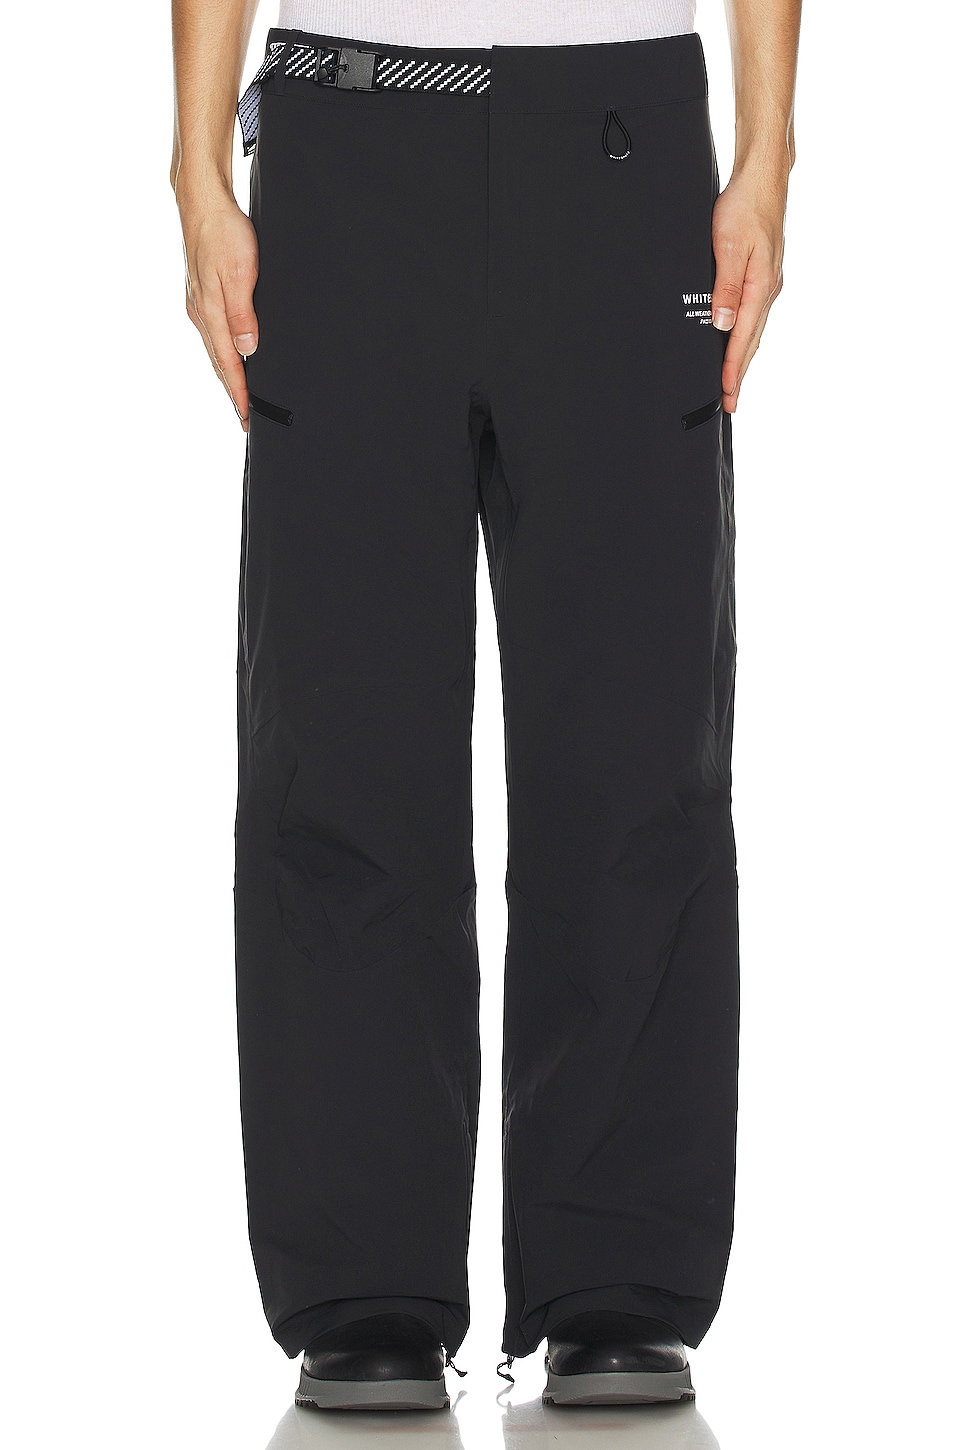 Whitespace 3l Performance Pant in Black